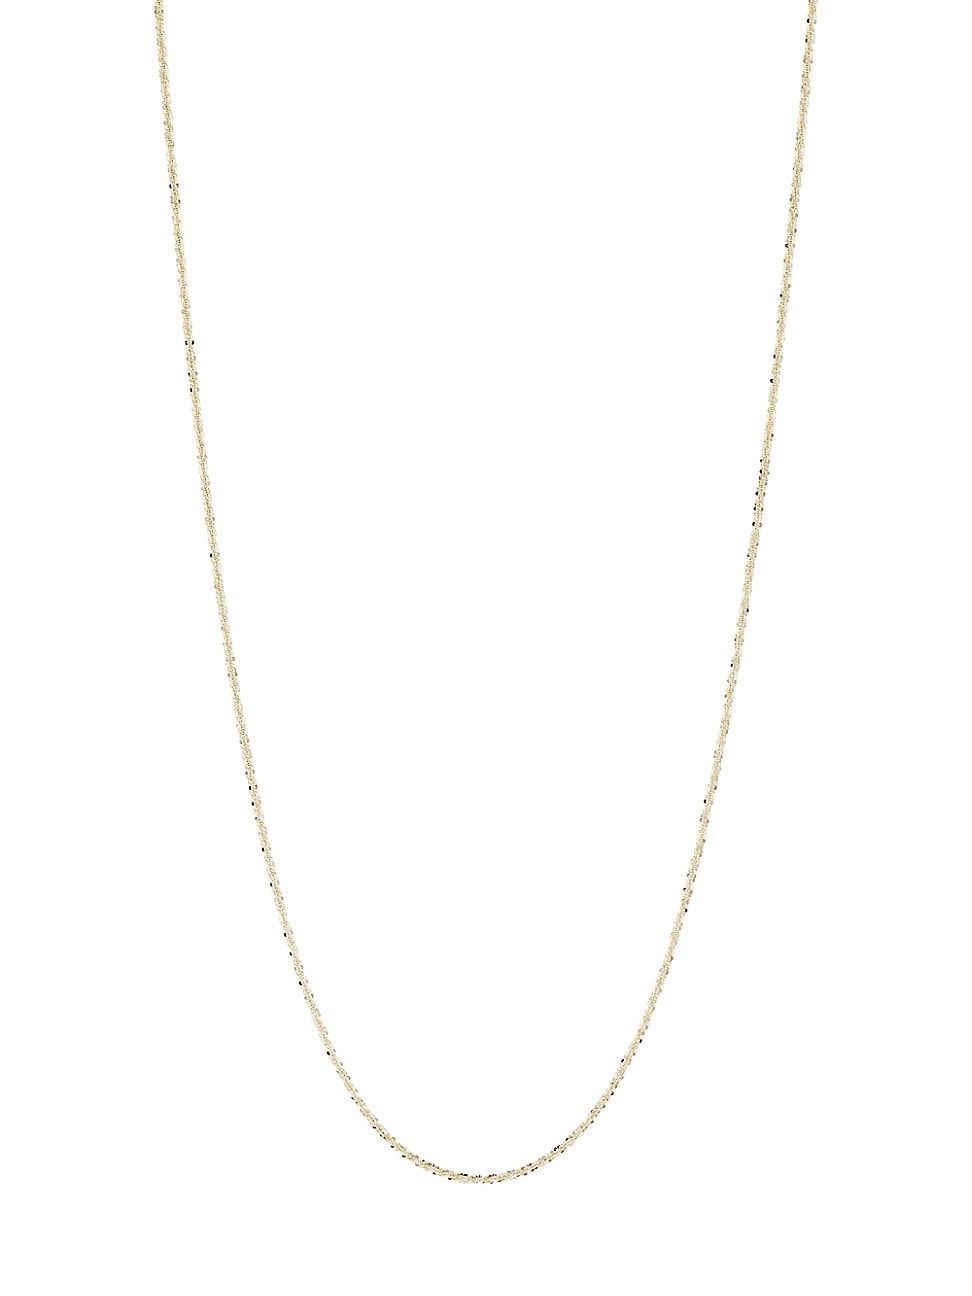 Solid 14K Gold Chain Necklace | Saks Fifth Avenue